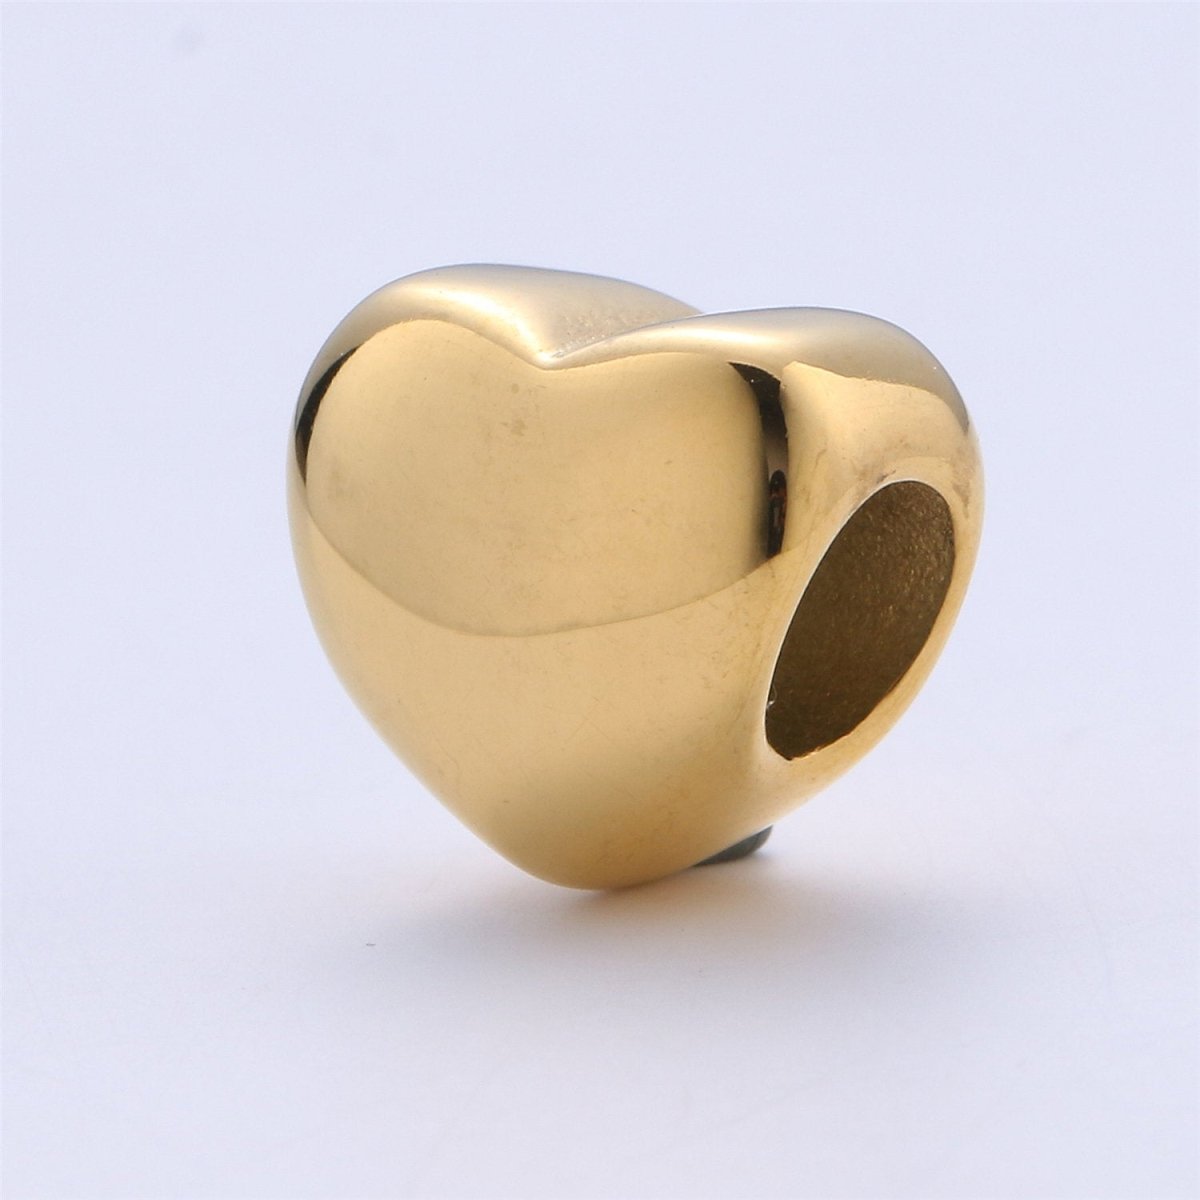 1pc Stainless Steel Gold Large Hole Heart Pattern Spacer Bead, for DIY Jewelry Making European Charms Beaded Bracelet, Size 11x10mm Hole 3mm - DLUXCA